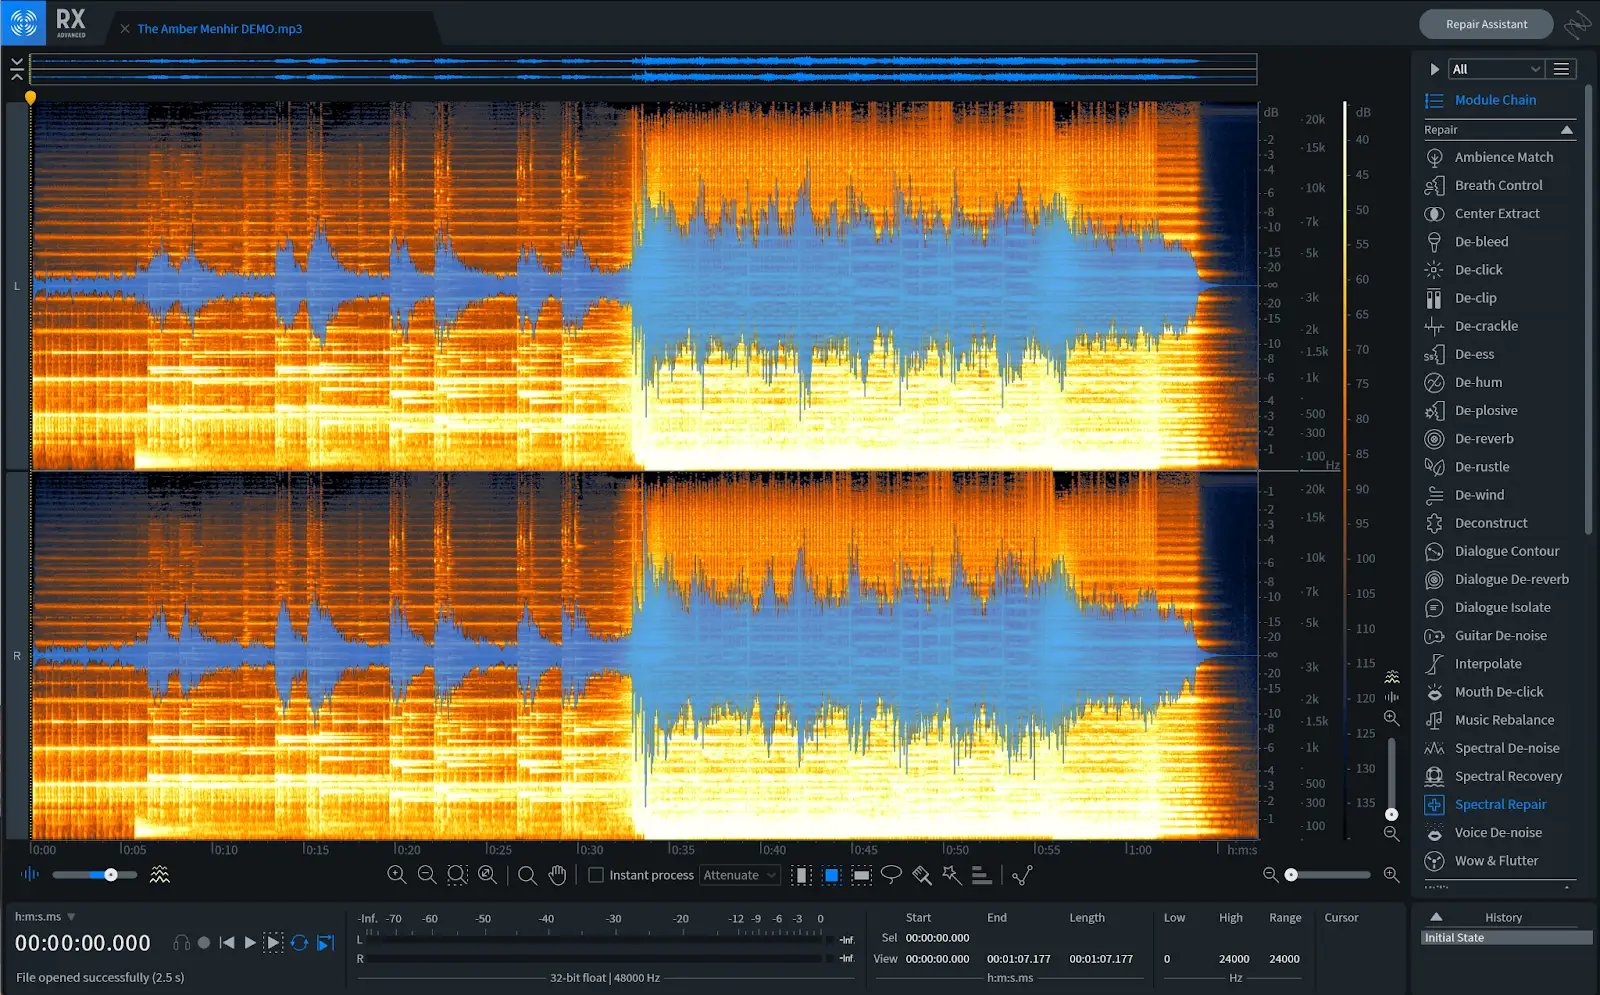 iZotope RX displays a layered waveform and spectrogram view